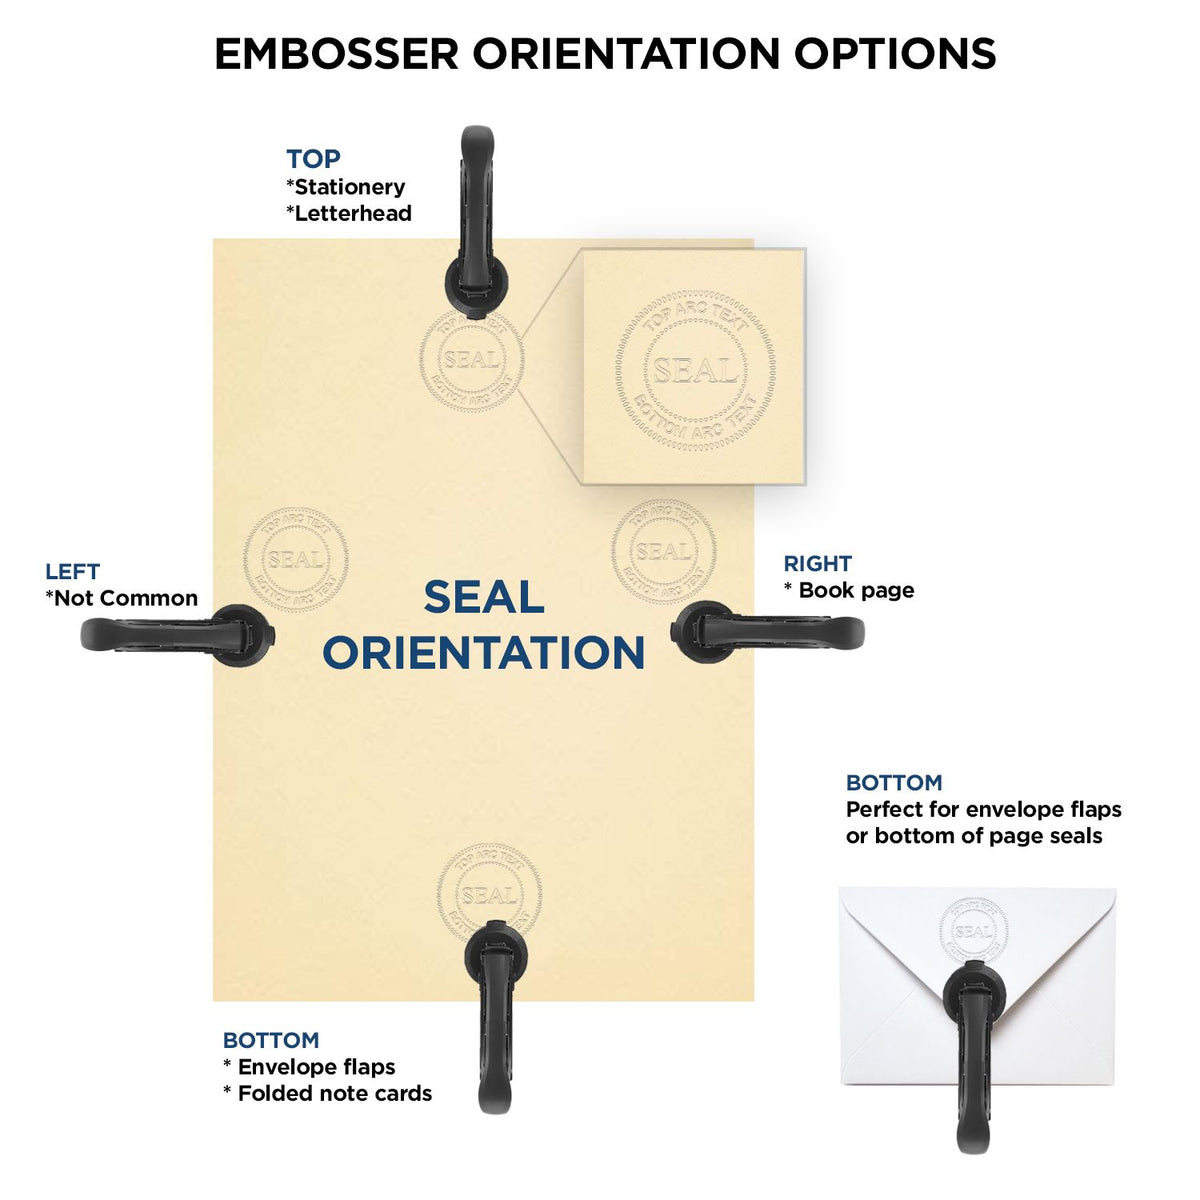 An infographic for the Soft Pocket Alaska Landscape Architect Embosser showing embosser orientation, this is showing examples of a top, bottom, right and left insert.